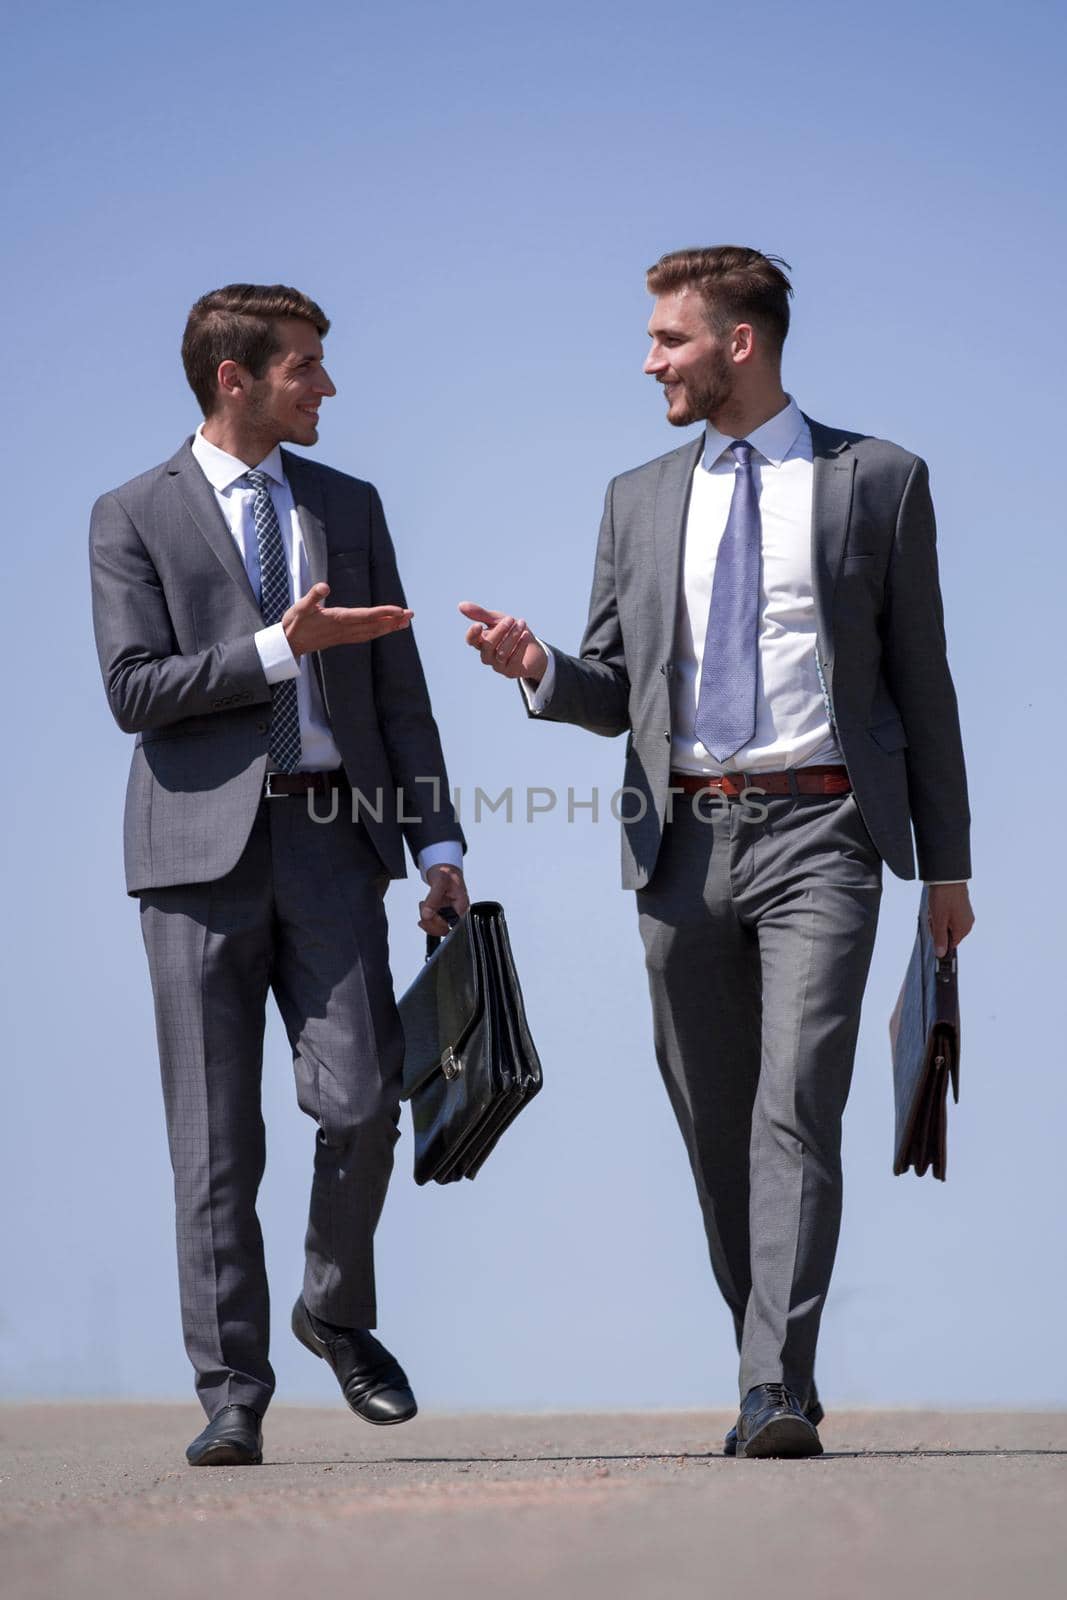 business people discuss something on the street by asdf